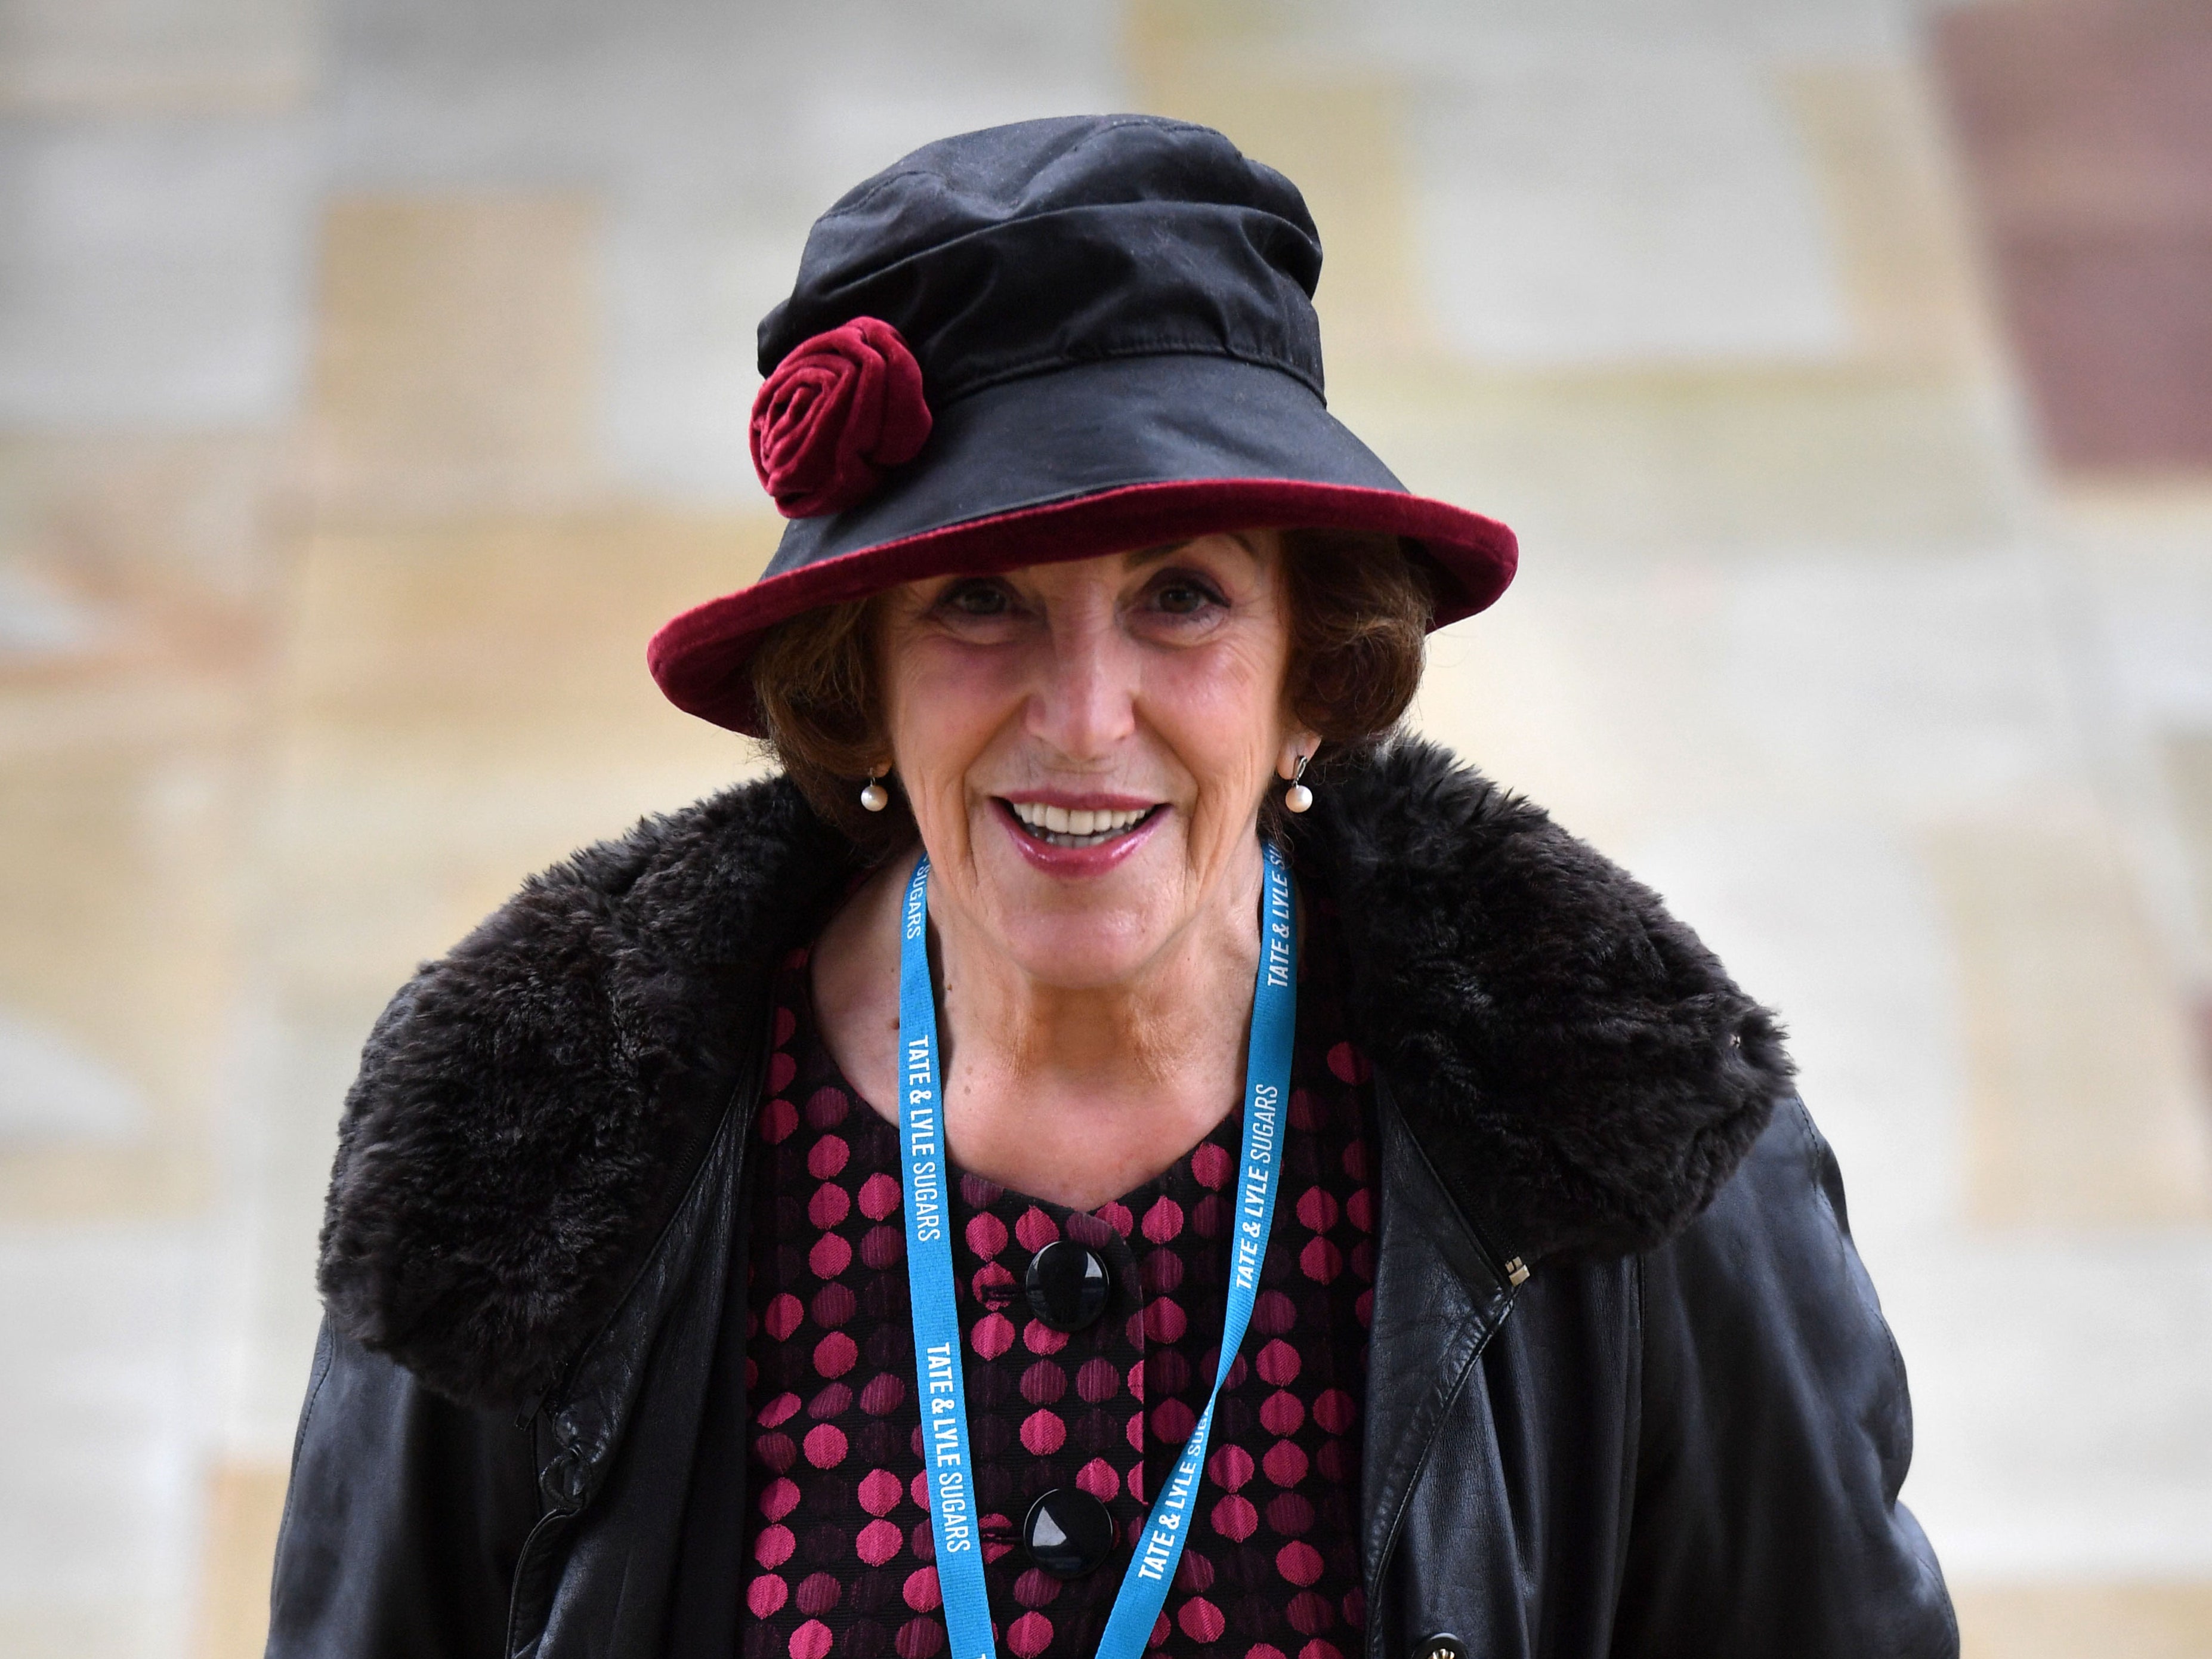 Edwina Currie offered a curt reply to Youtuber’s claim about sexuality and face masks